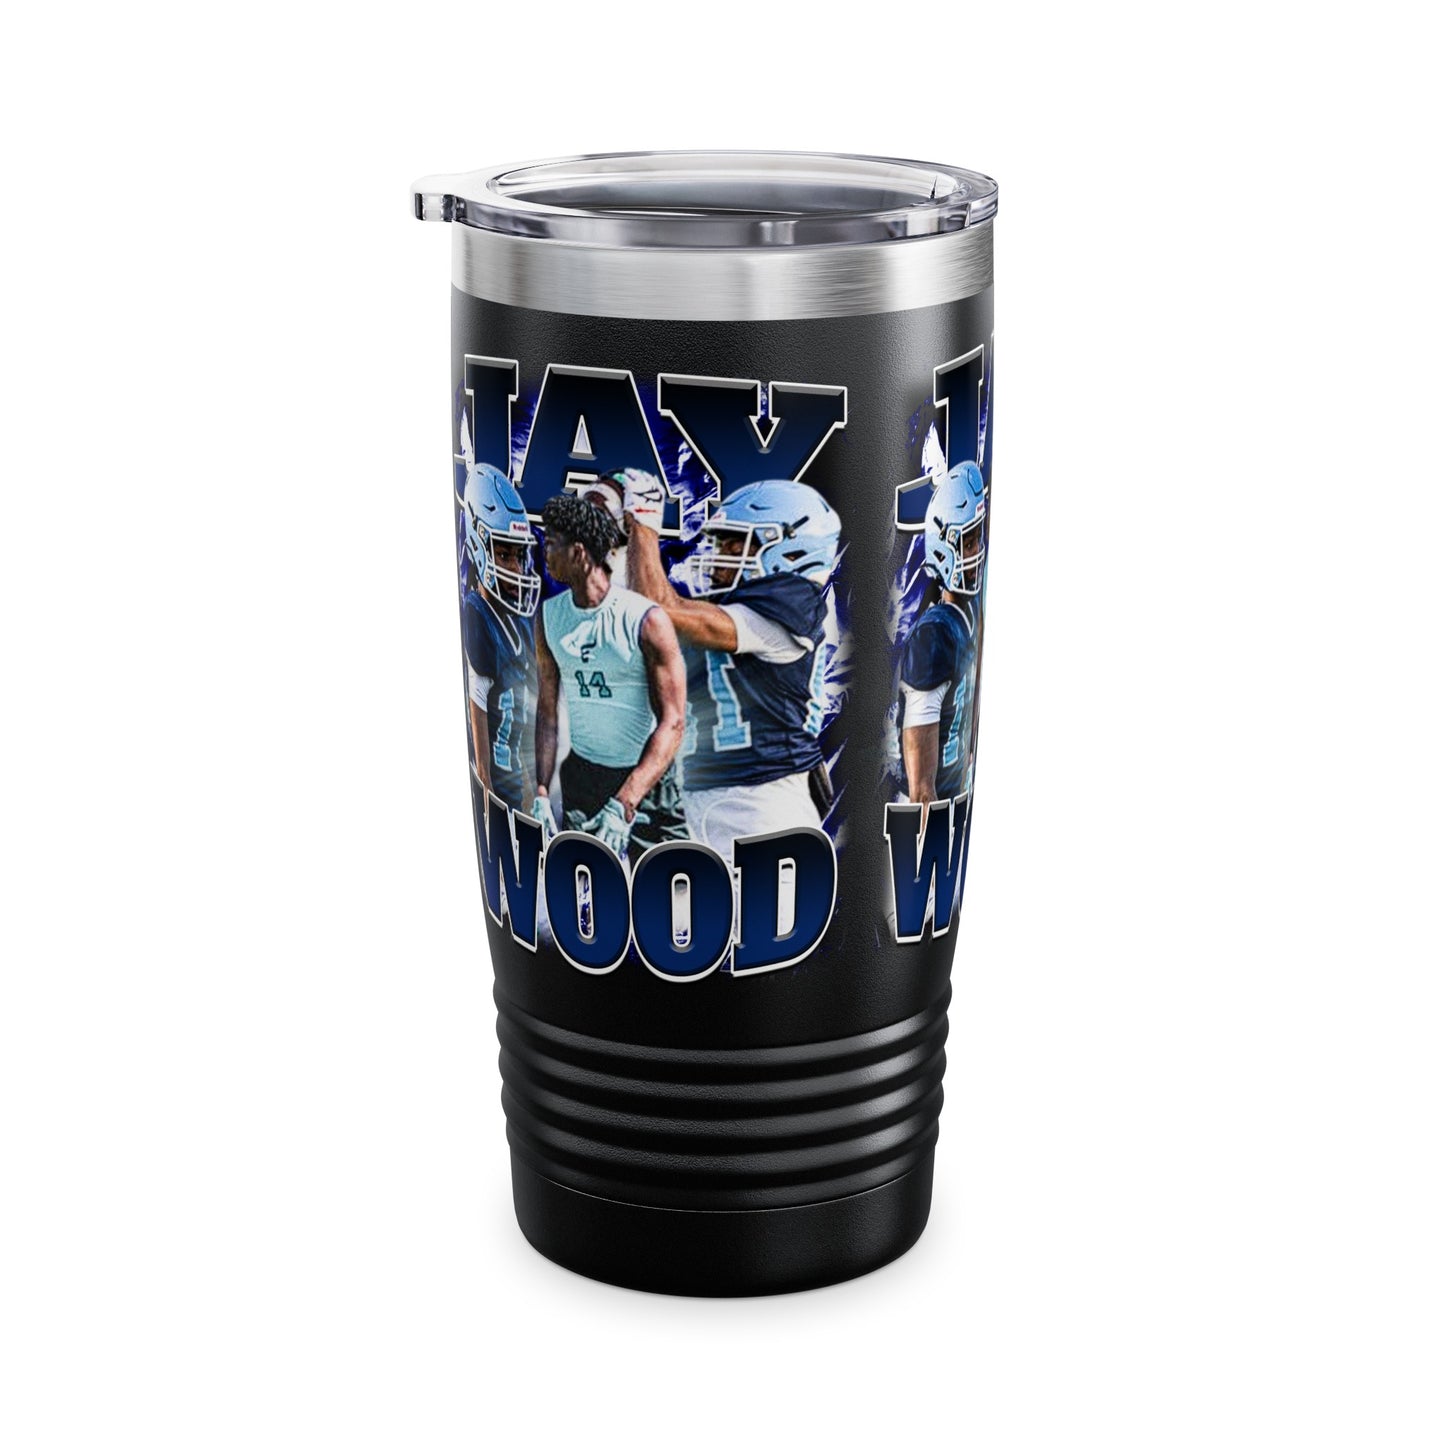 Jay Wood Stainless Steal Tumbler